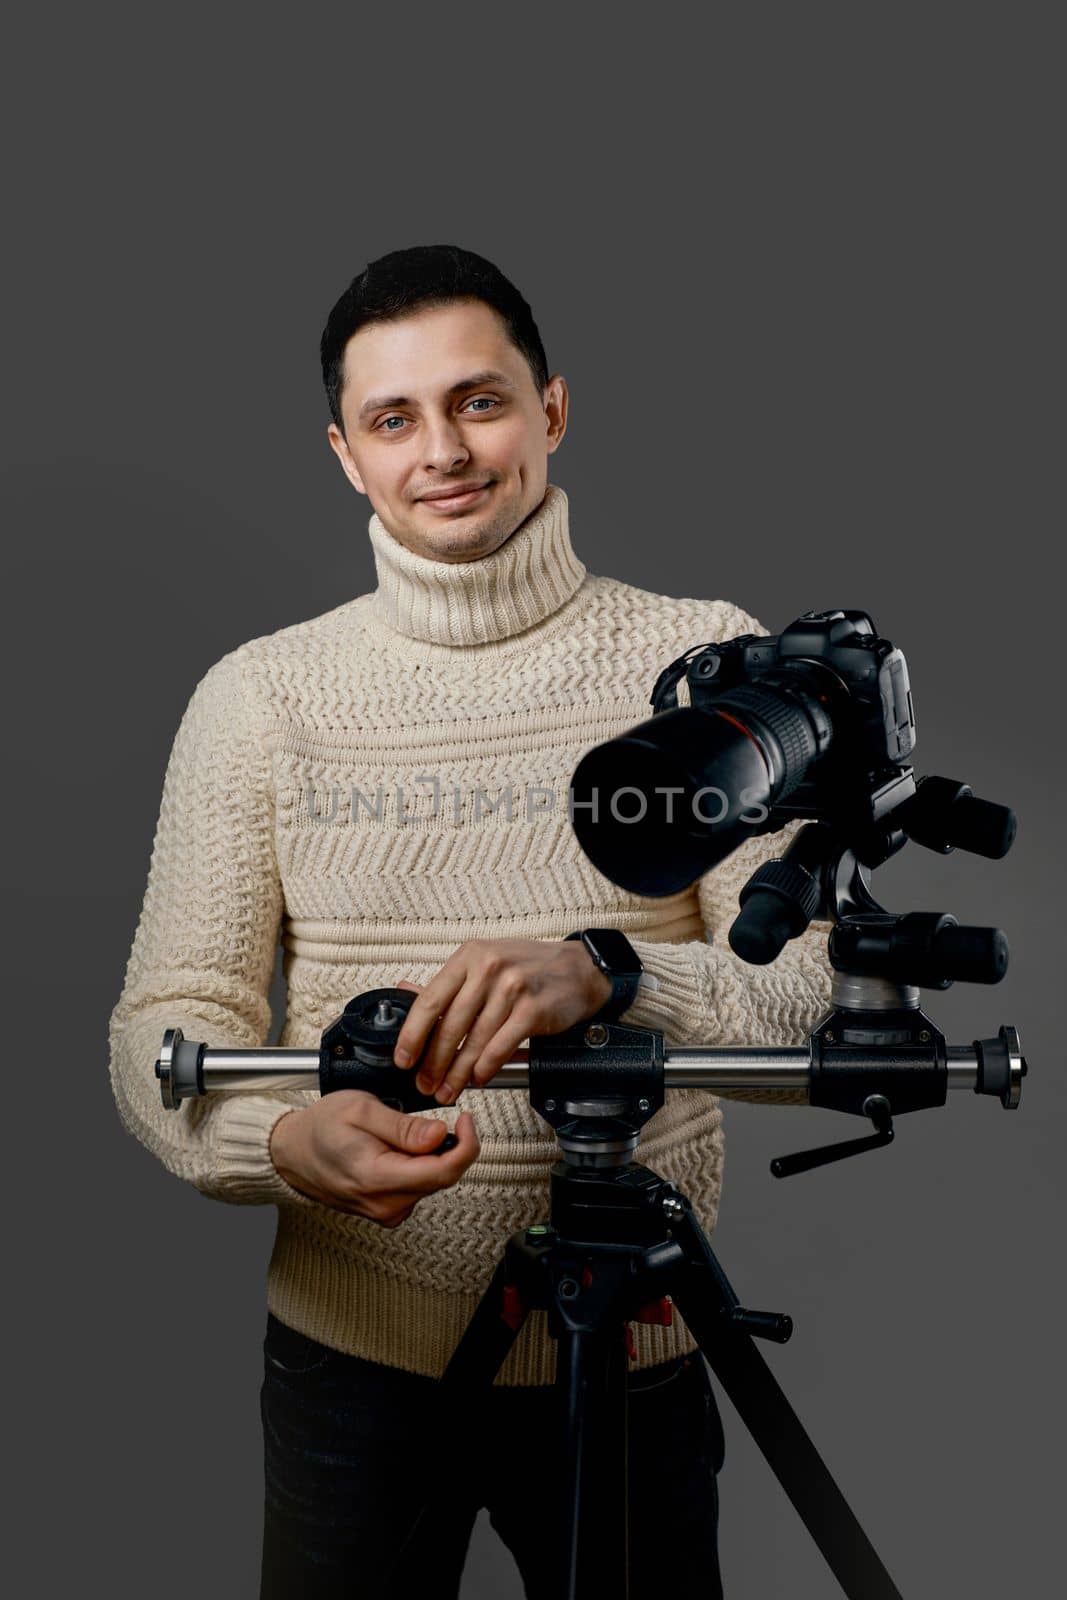 Delighted professional photographer with digital camera on tripod on gray background